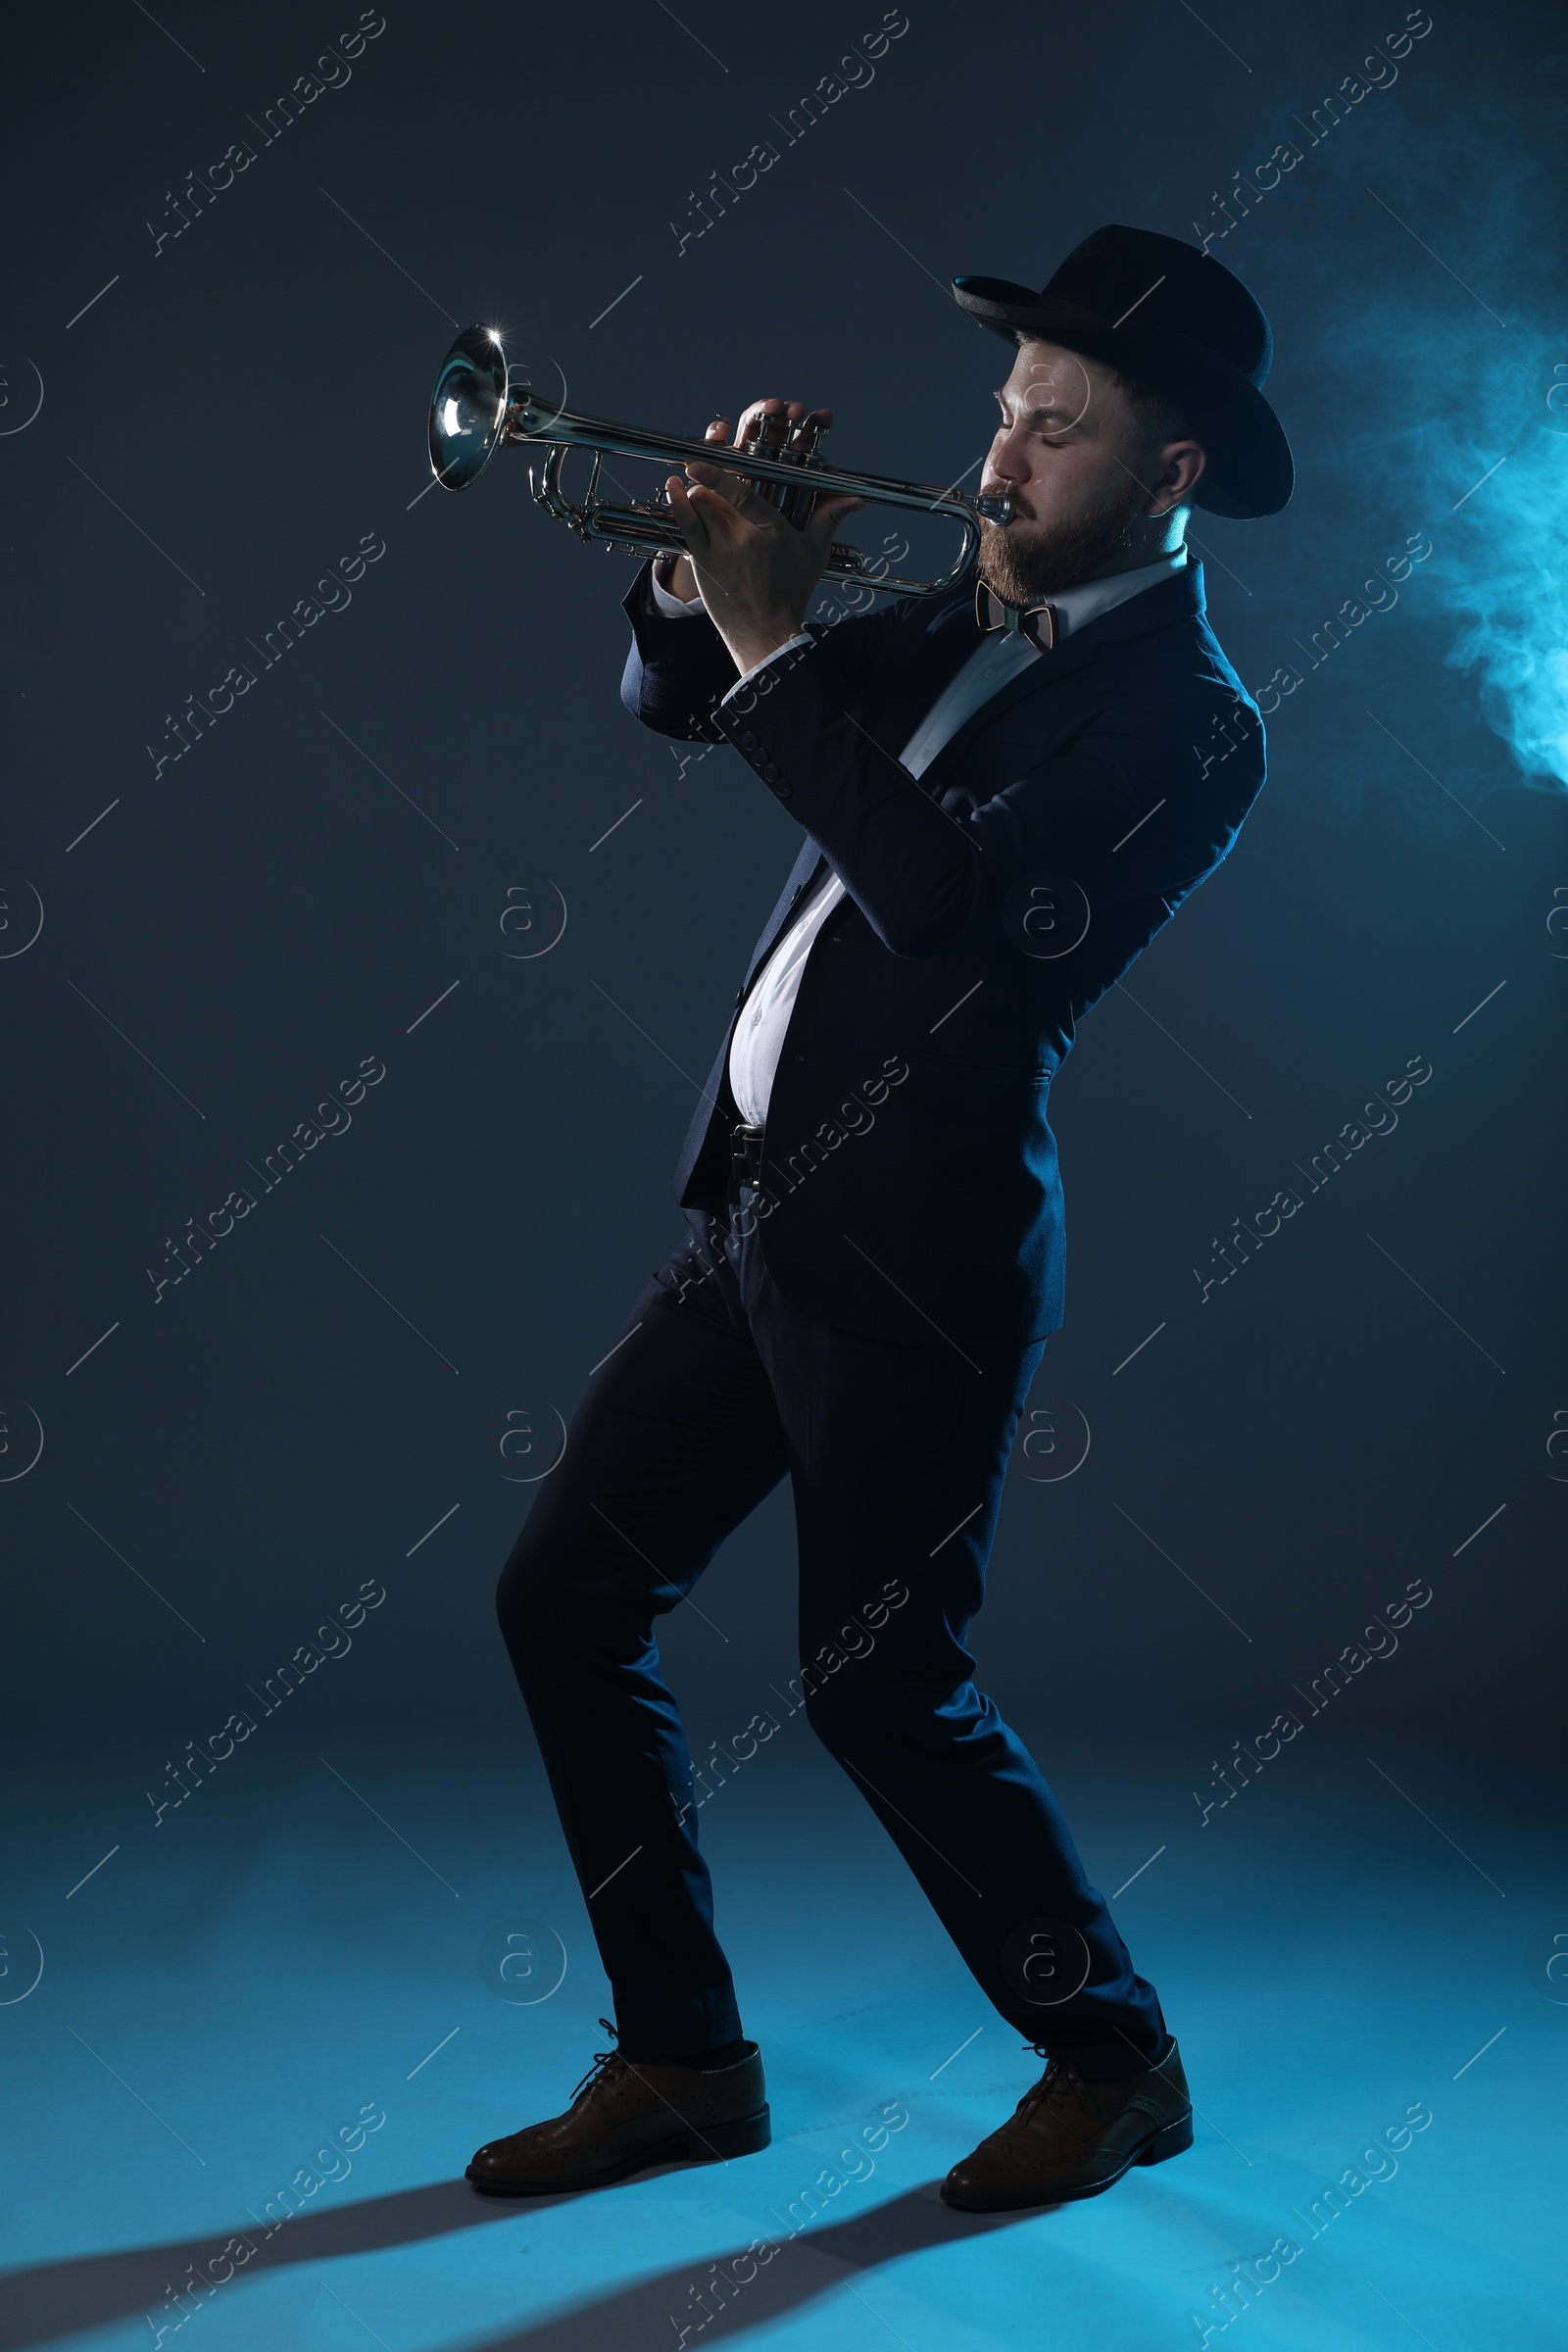 Photo of Professional musician playing trumpet on dark background in blue lights and smoke